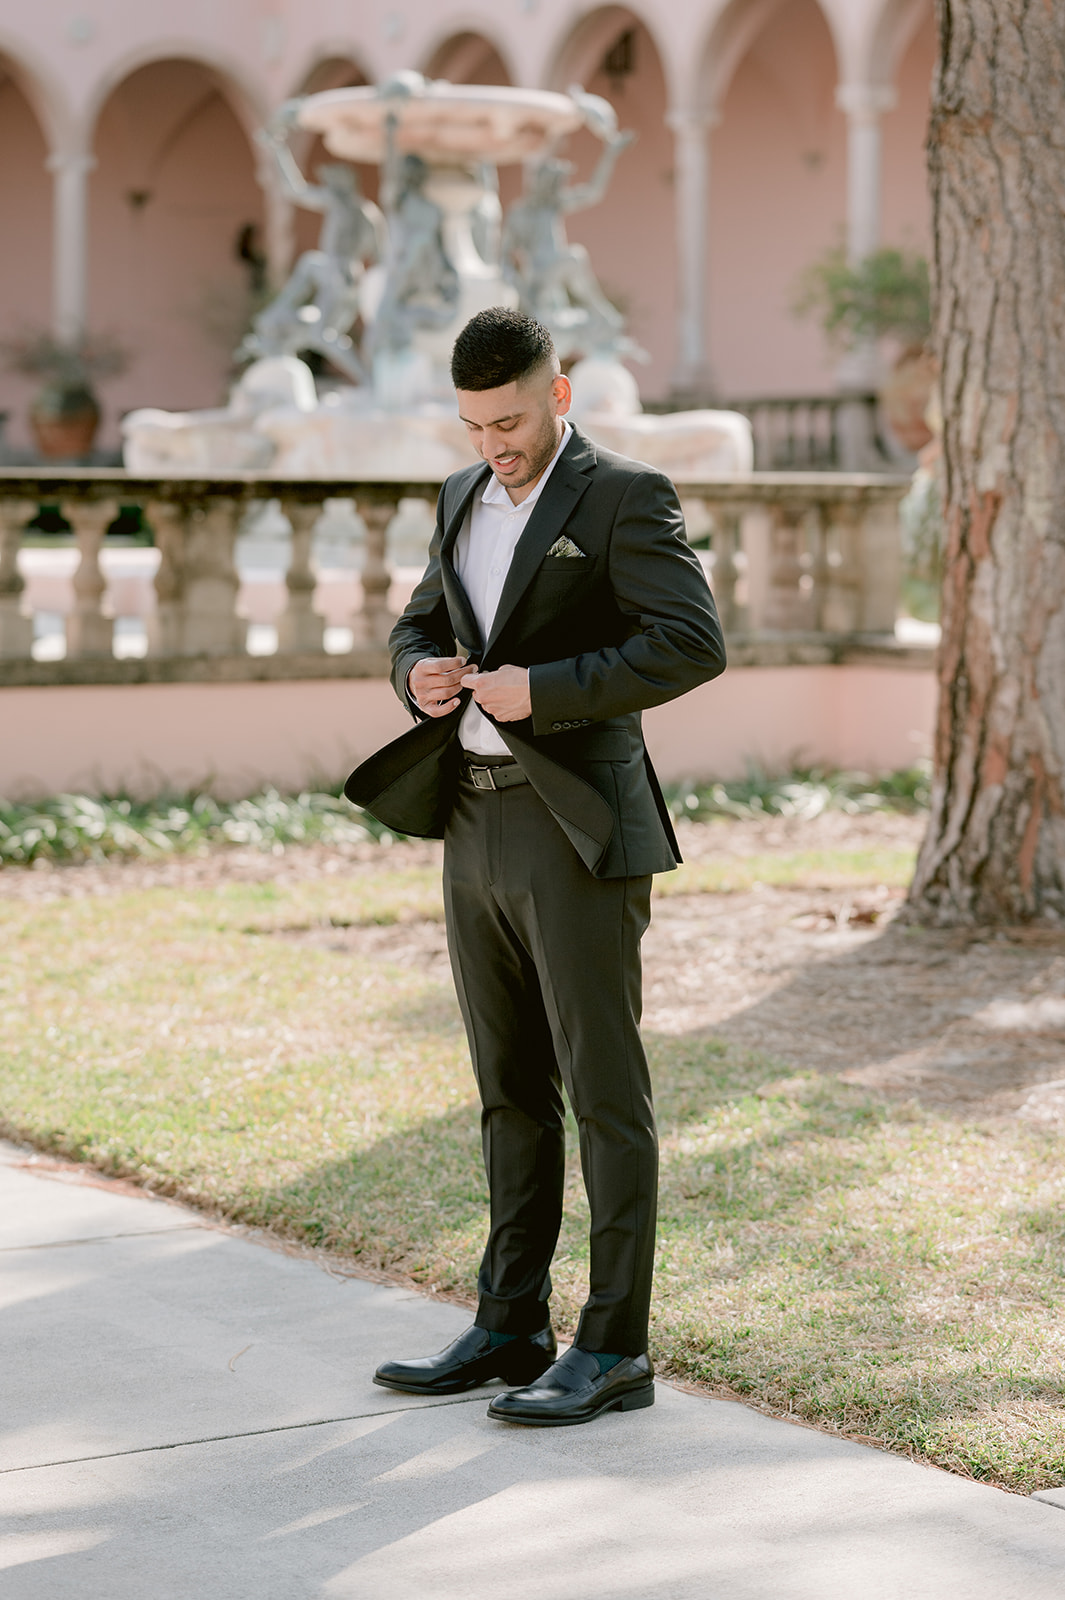 "Ringling Museum engagement session with the Ca' d'Zan as a beautiful and elegant backdrop"
